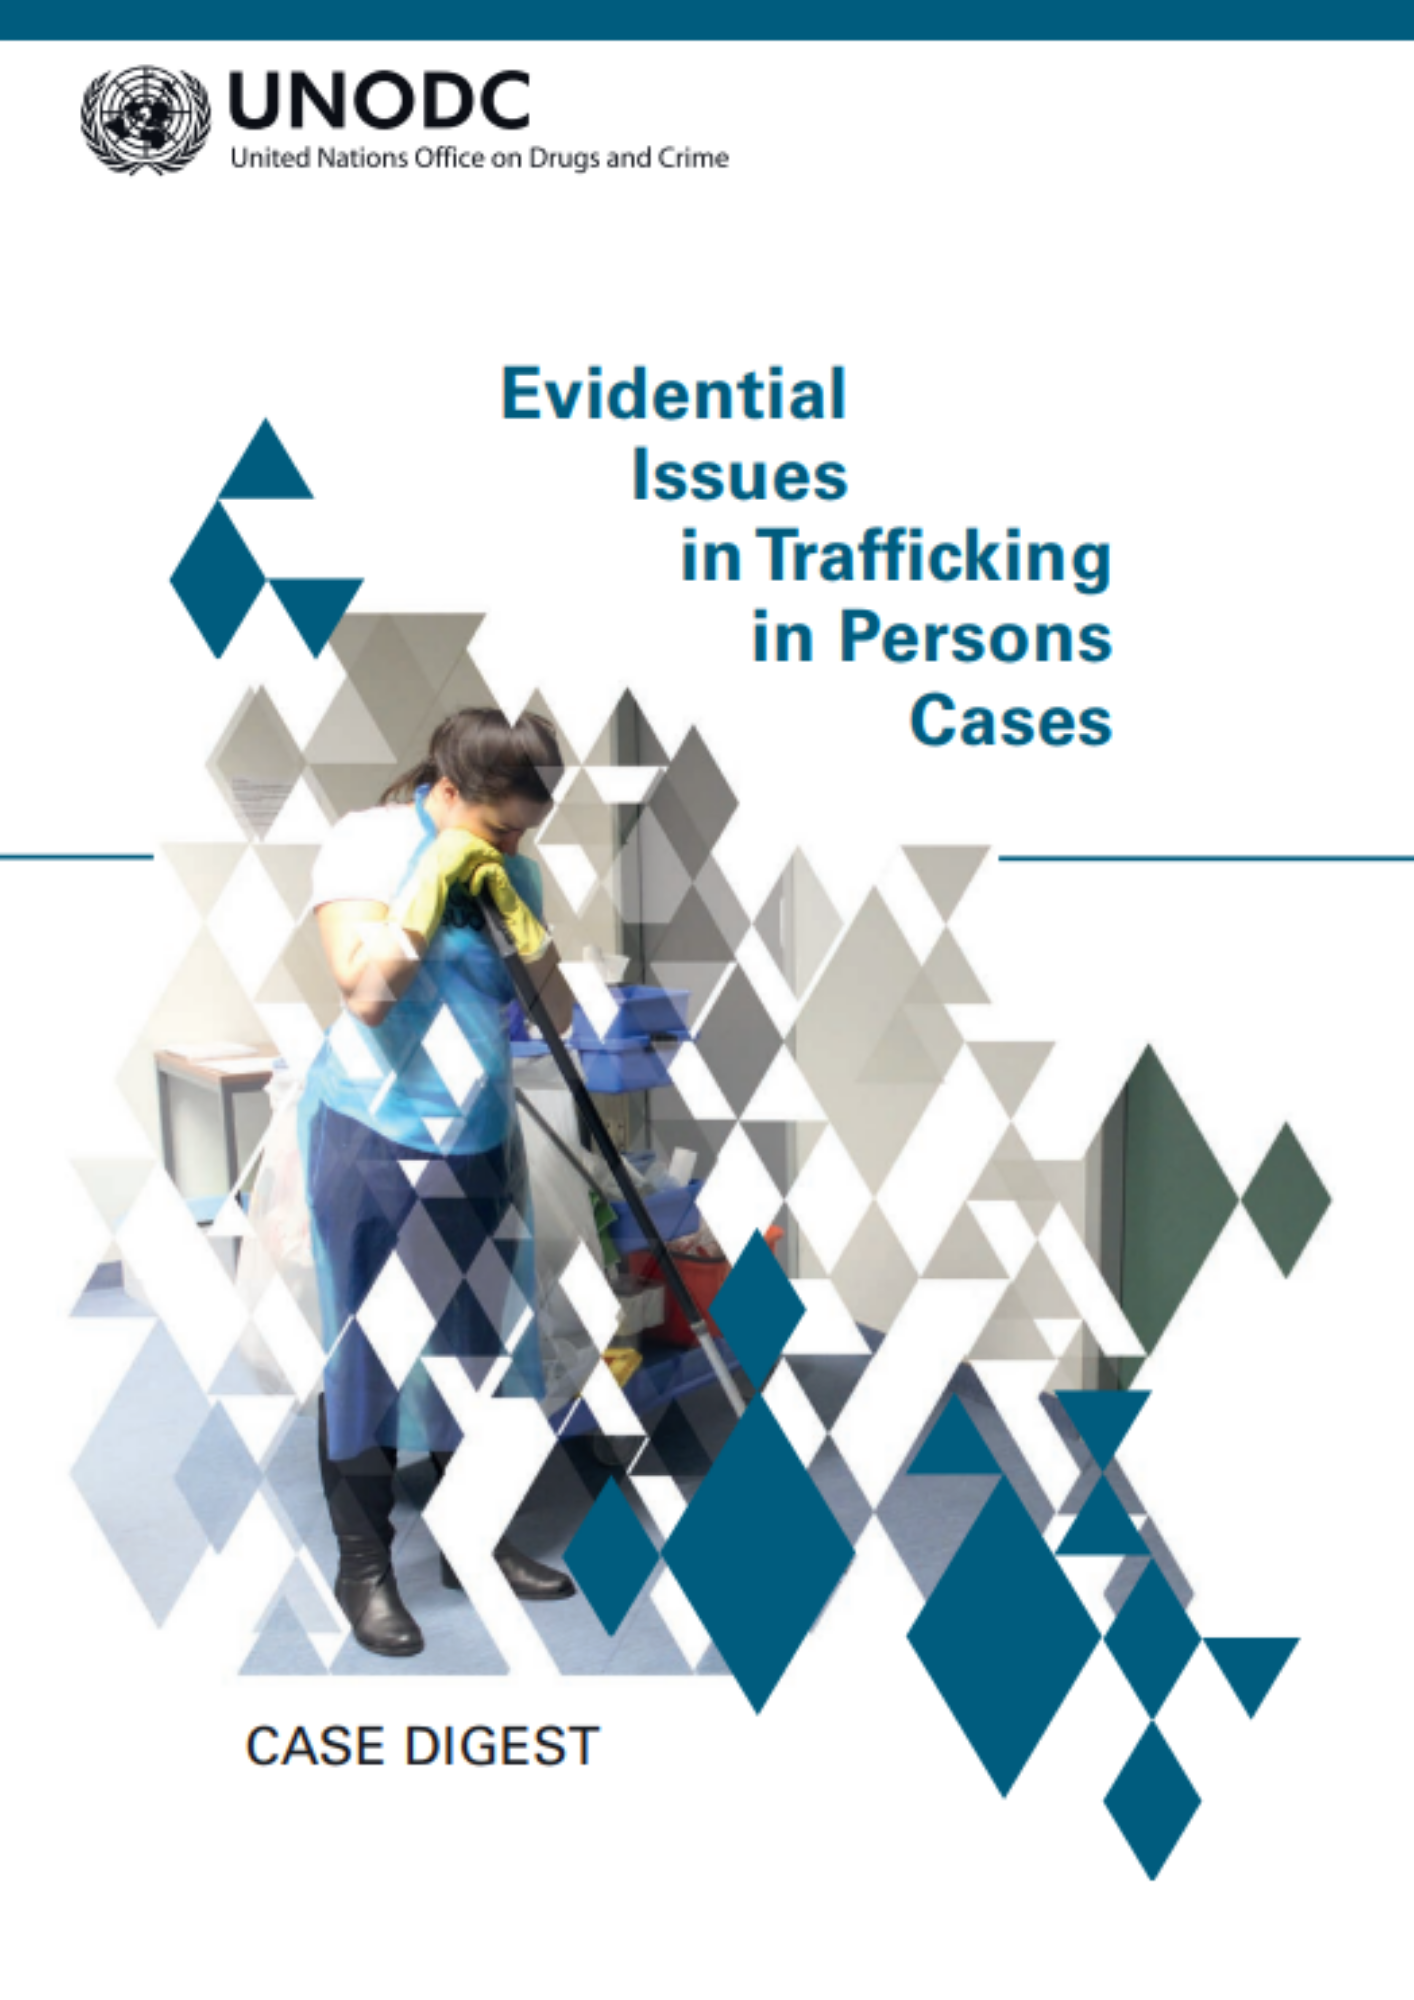 <div style="text-align: center;"><a href="https://www.unodc.org/documents/human-trafficking/2017/Case_Digest_Evidential_Issues_in_Trafficking.pdf">Evidential Issues in Trafficking in Persons Cases</a></div>